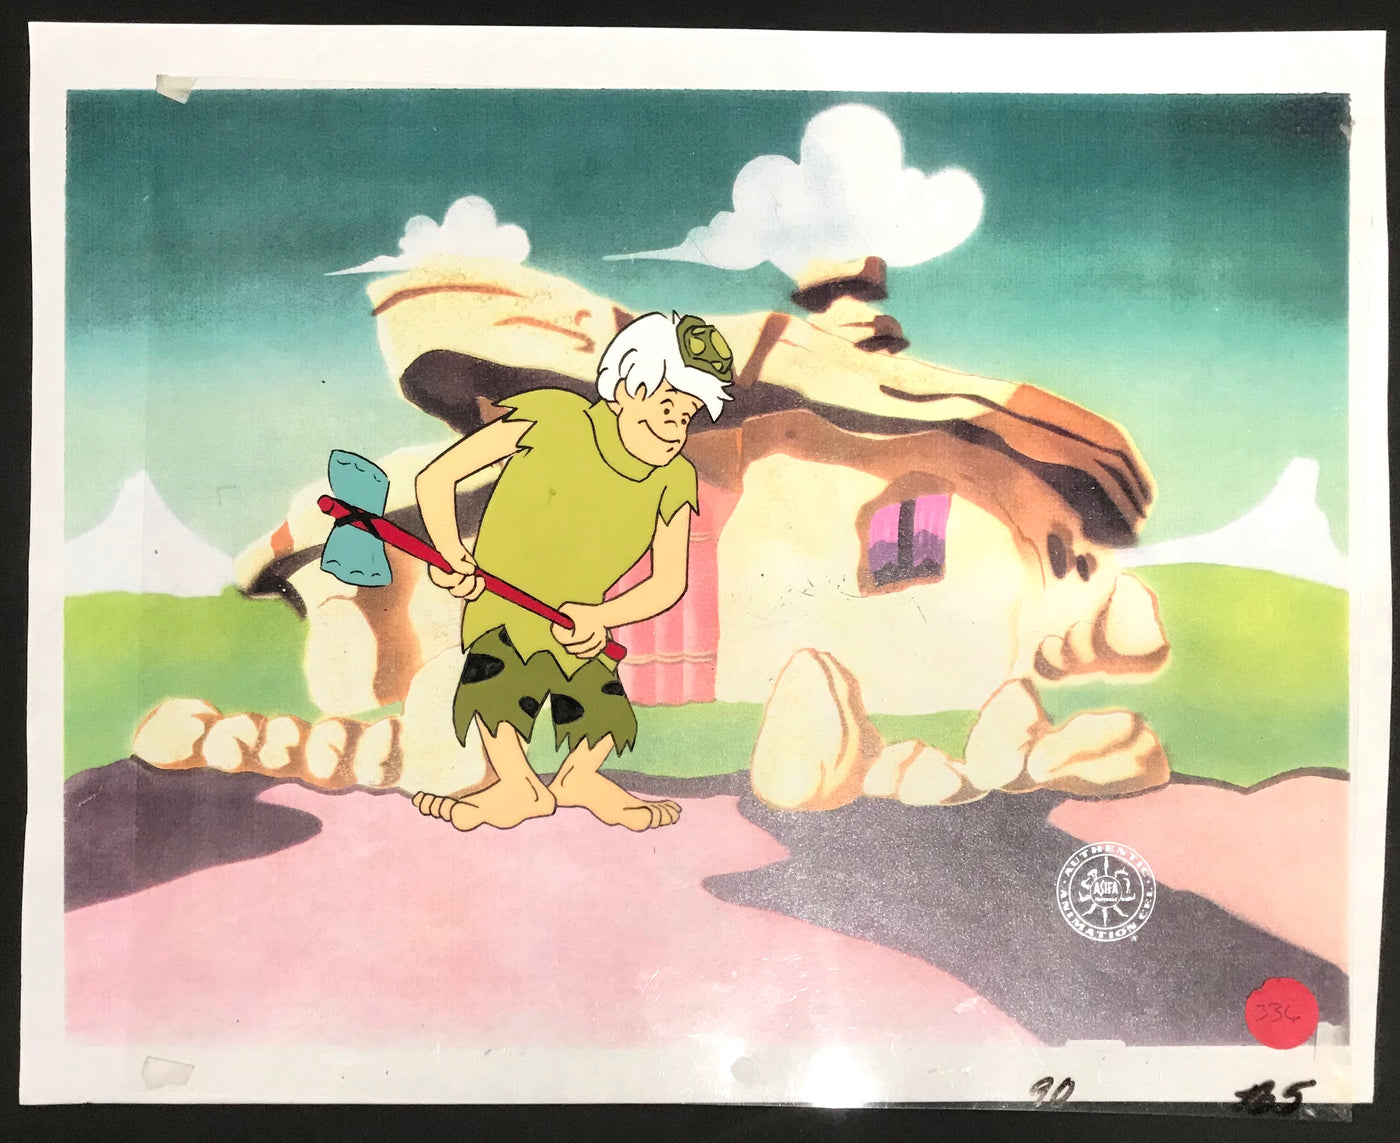 Hanna Barbera Production Cel from The Pebbles and Bamm-Bamm Show featuring Bamm-Bamm